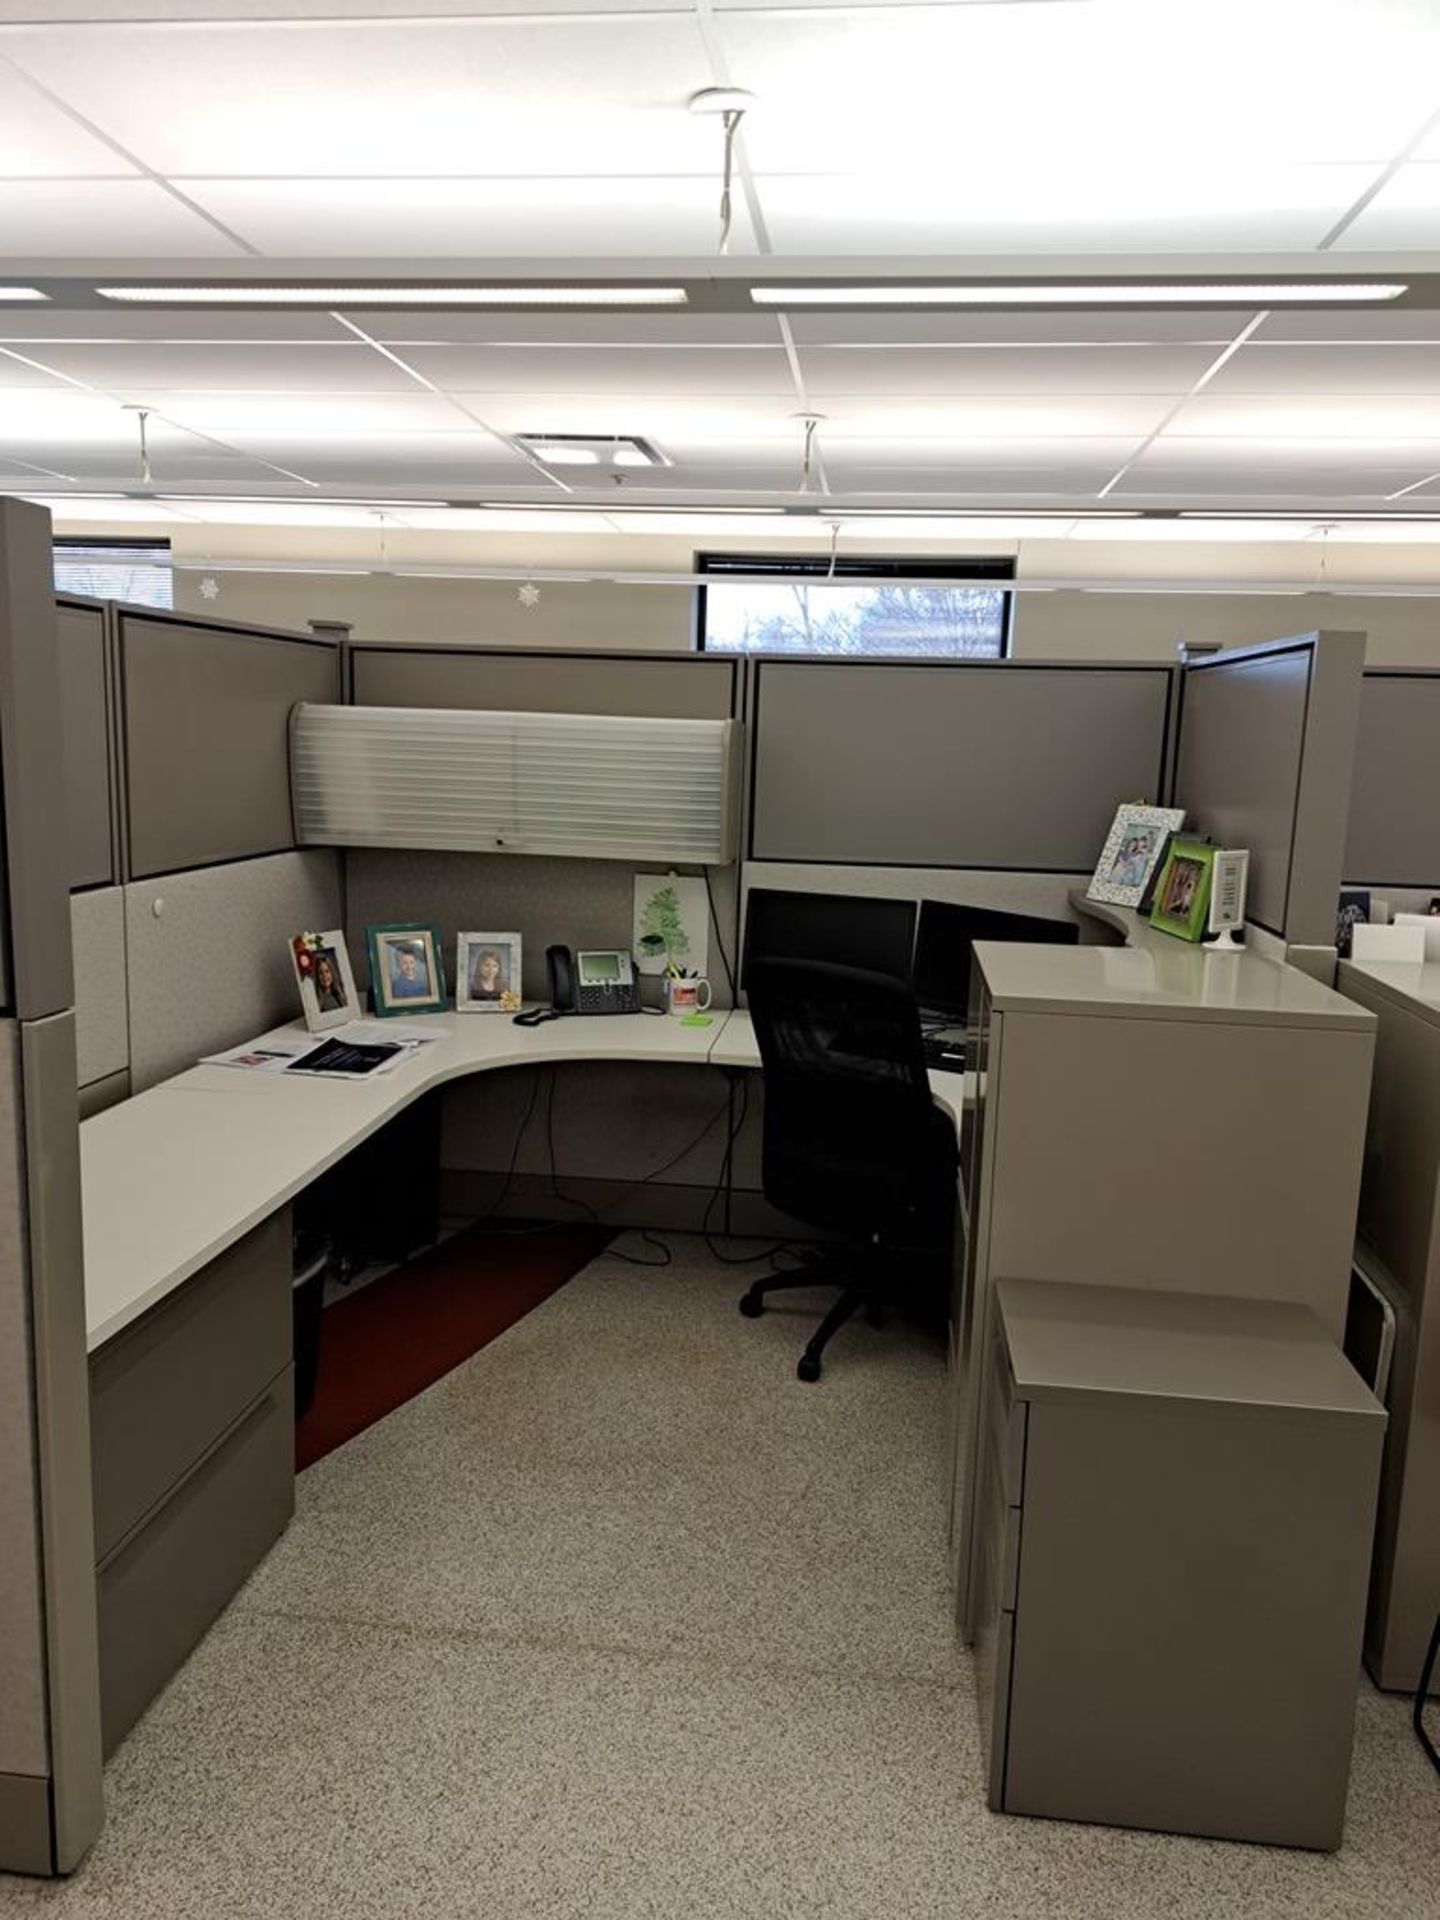 Lot Herman Miller Cubicle Work Stations, 17" W X 57' L, (12) Work Stations, Desks, Chairs, File - Image 10 of 32